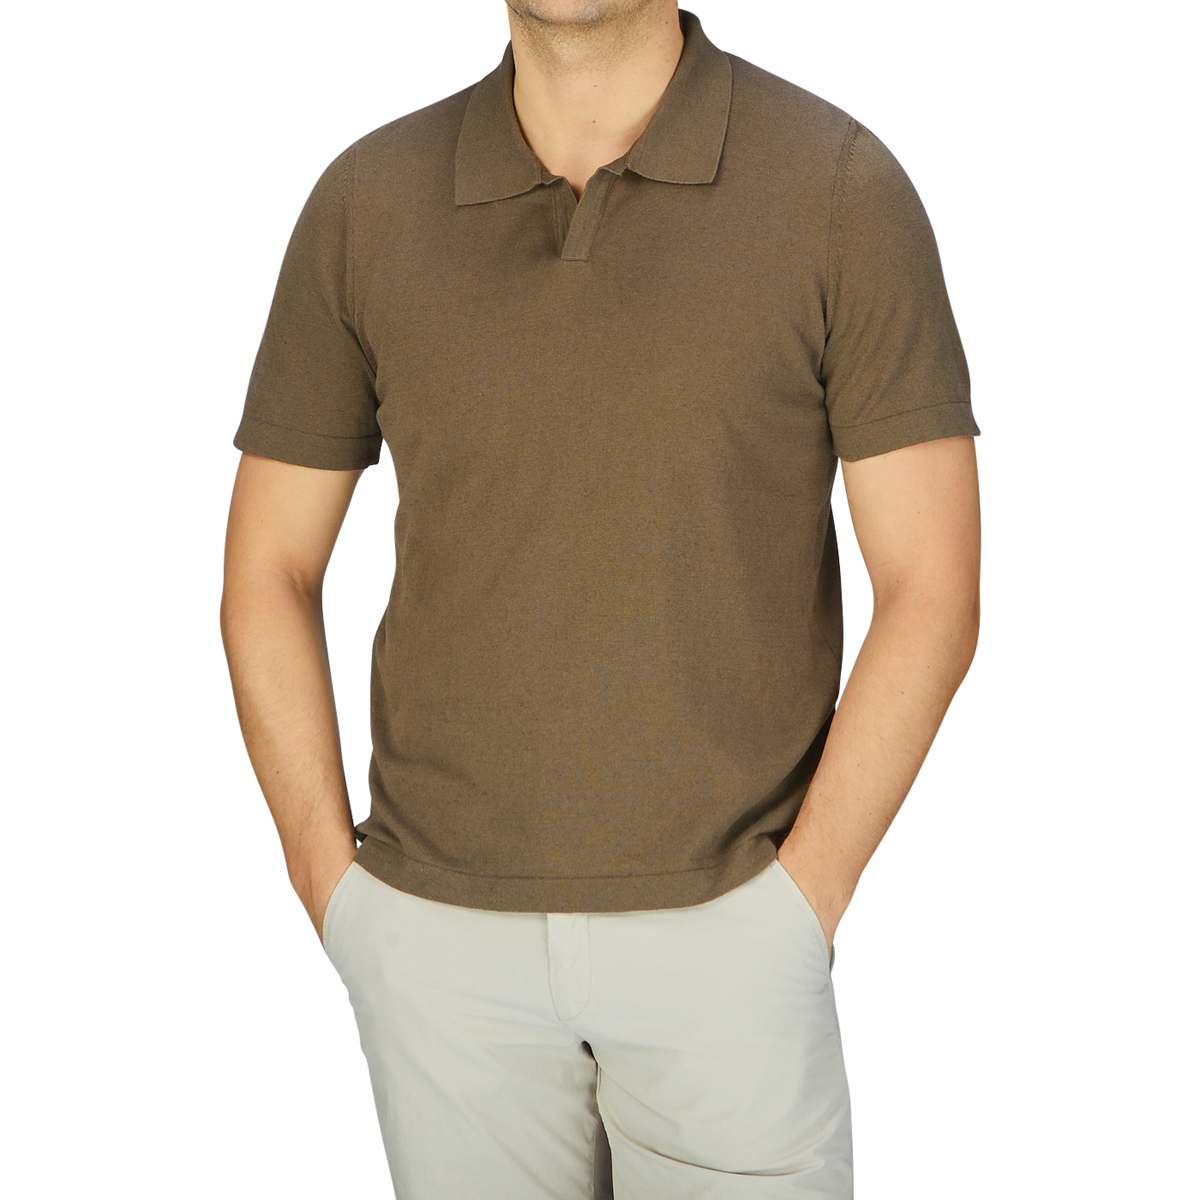 A man wearing a Olive Green Cotton Linen Polo Shirt by G.R.P and khaki pants.